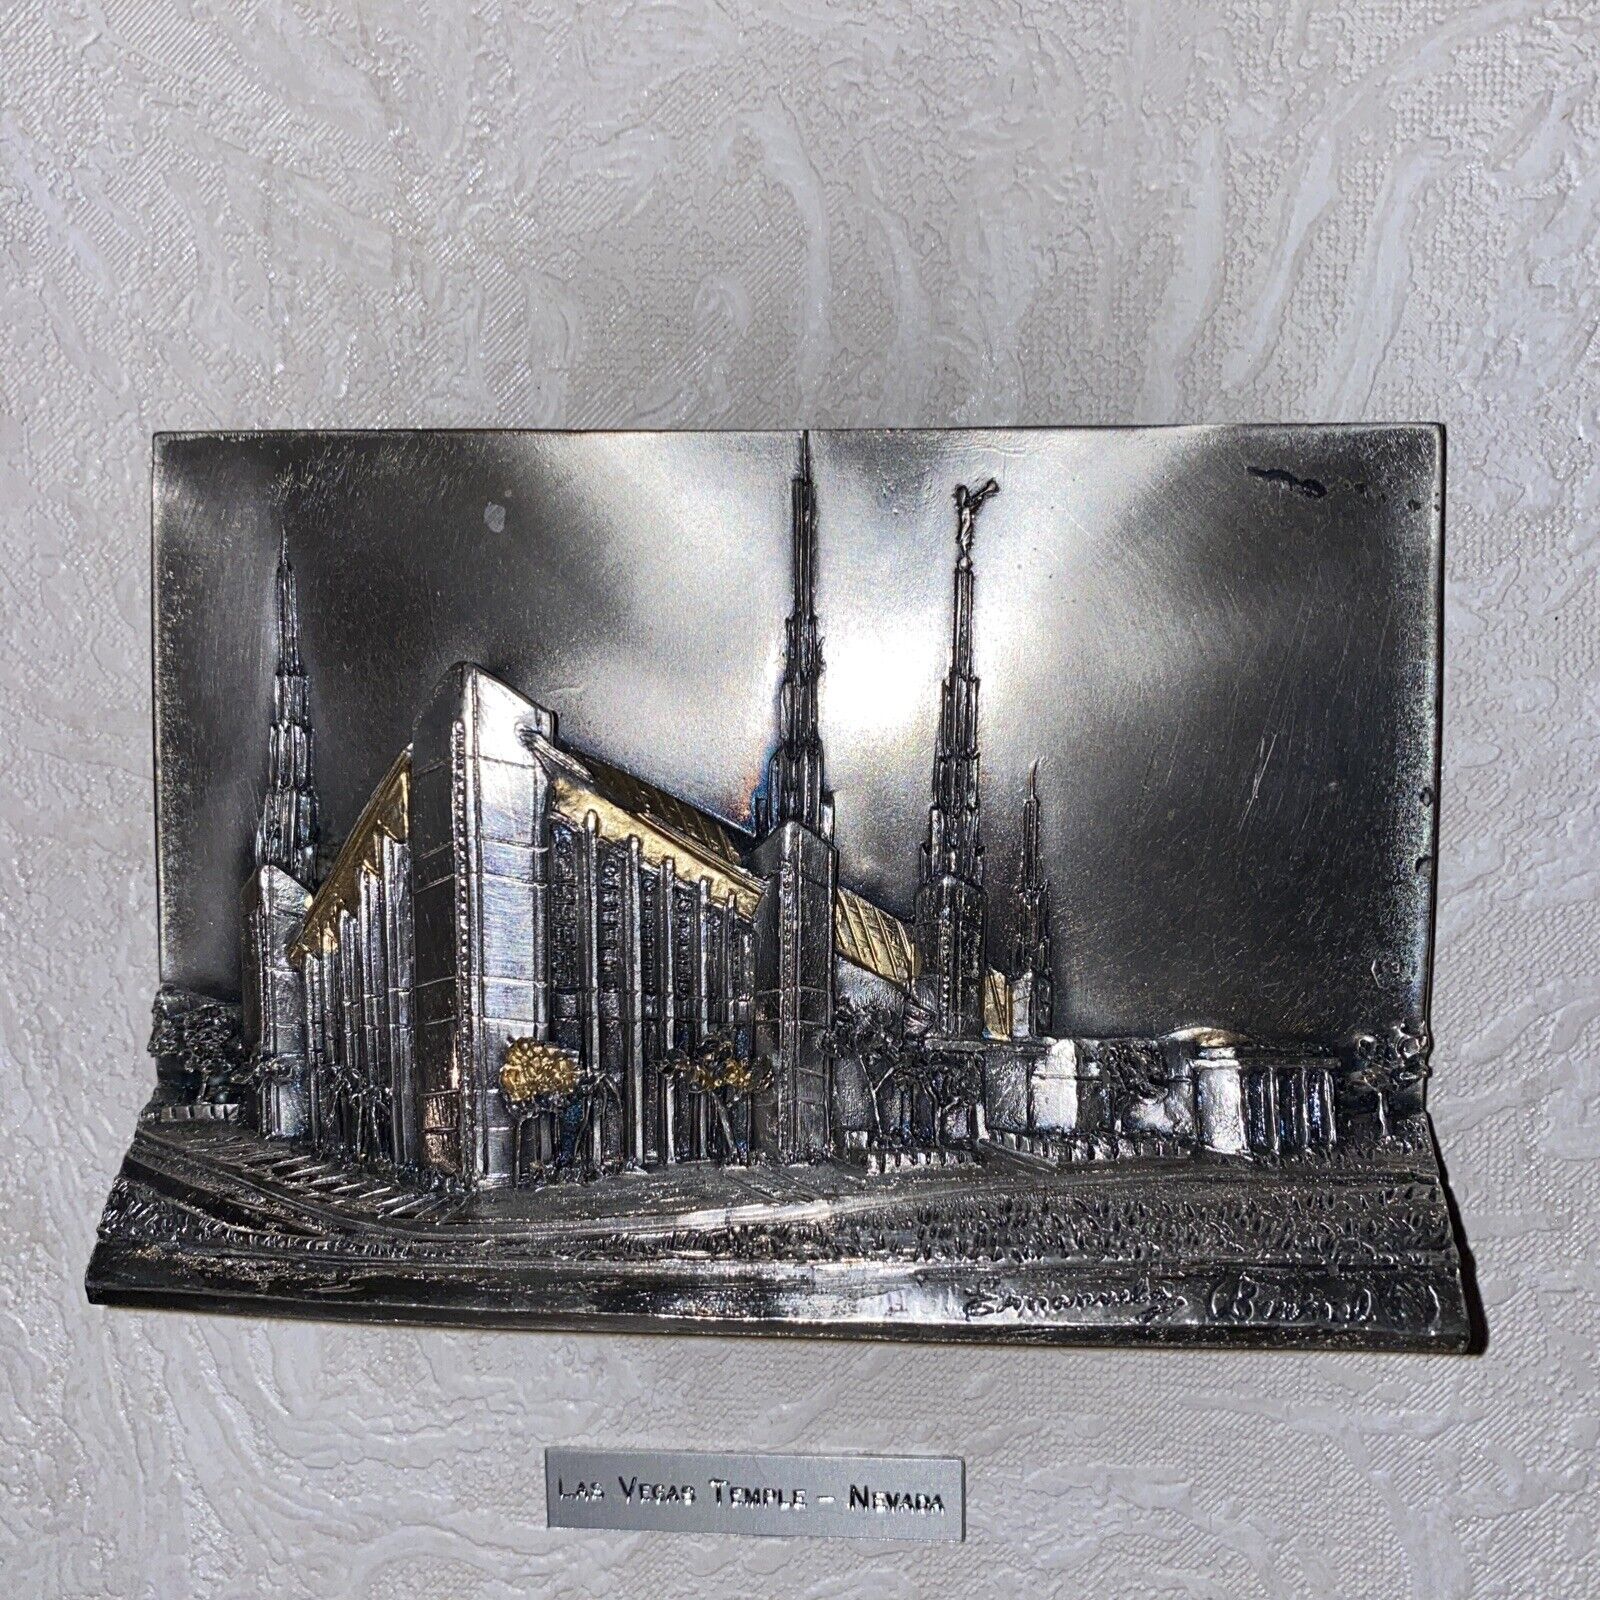 Beautiful 3D Las Vegas Temple-Nevada Matted Framed, Made In Italy